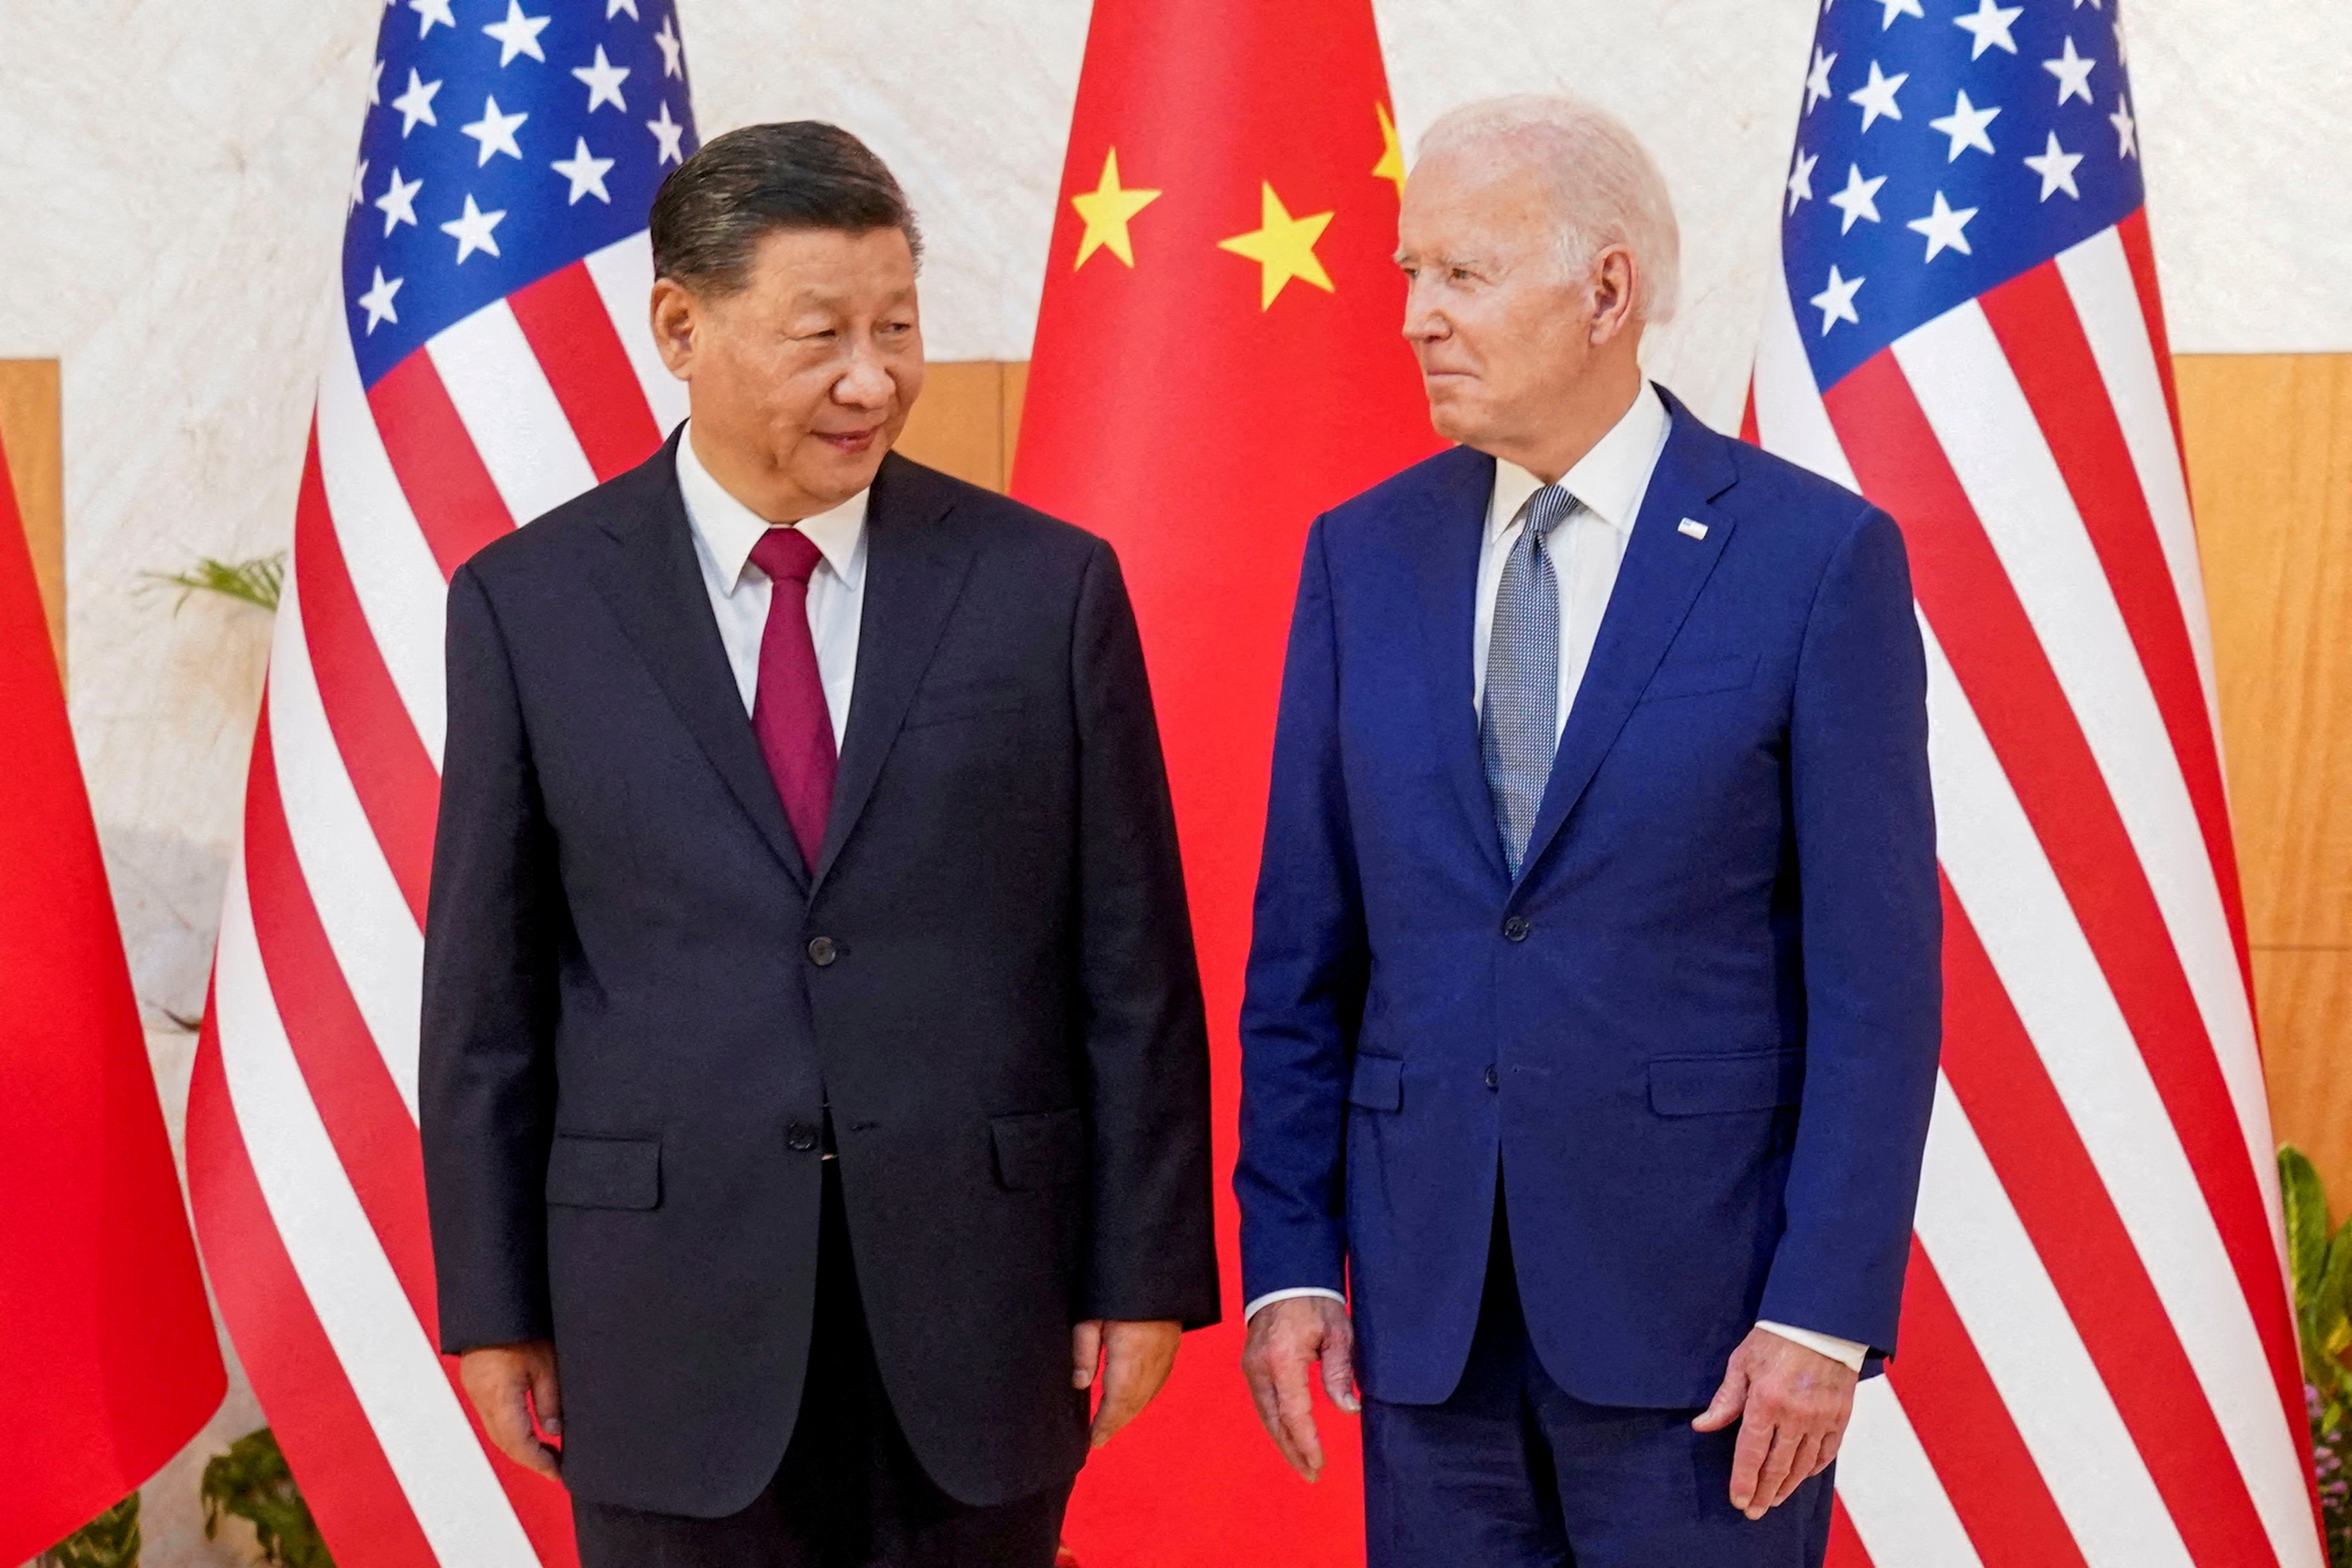 US President Joe Biden meets with Chinese President Xi Jinping on the sidelines of the G20 leaders’ summit in Bali, Indonesia, on November 14, 2022. Photo: Reuters